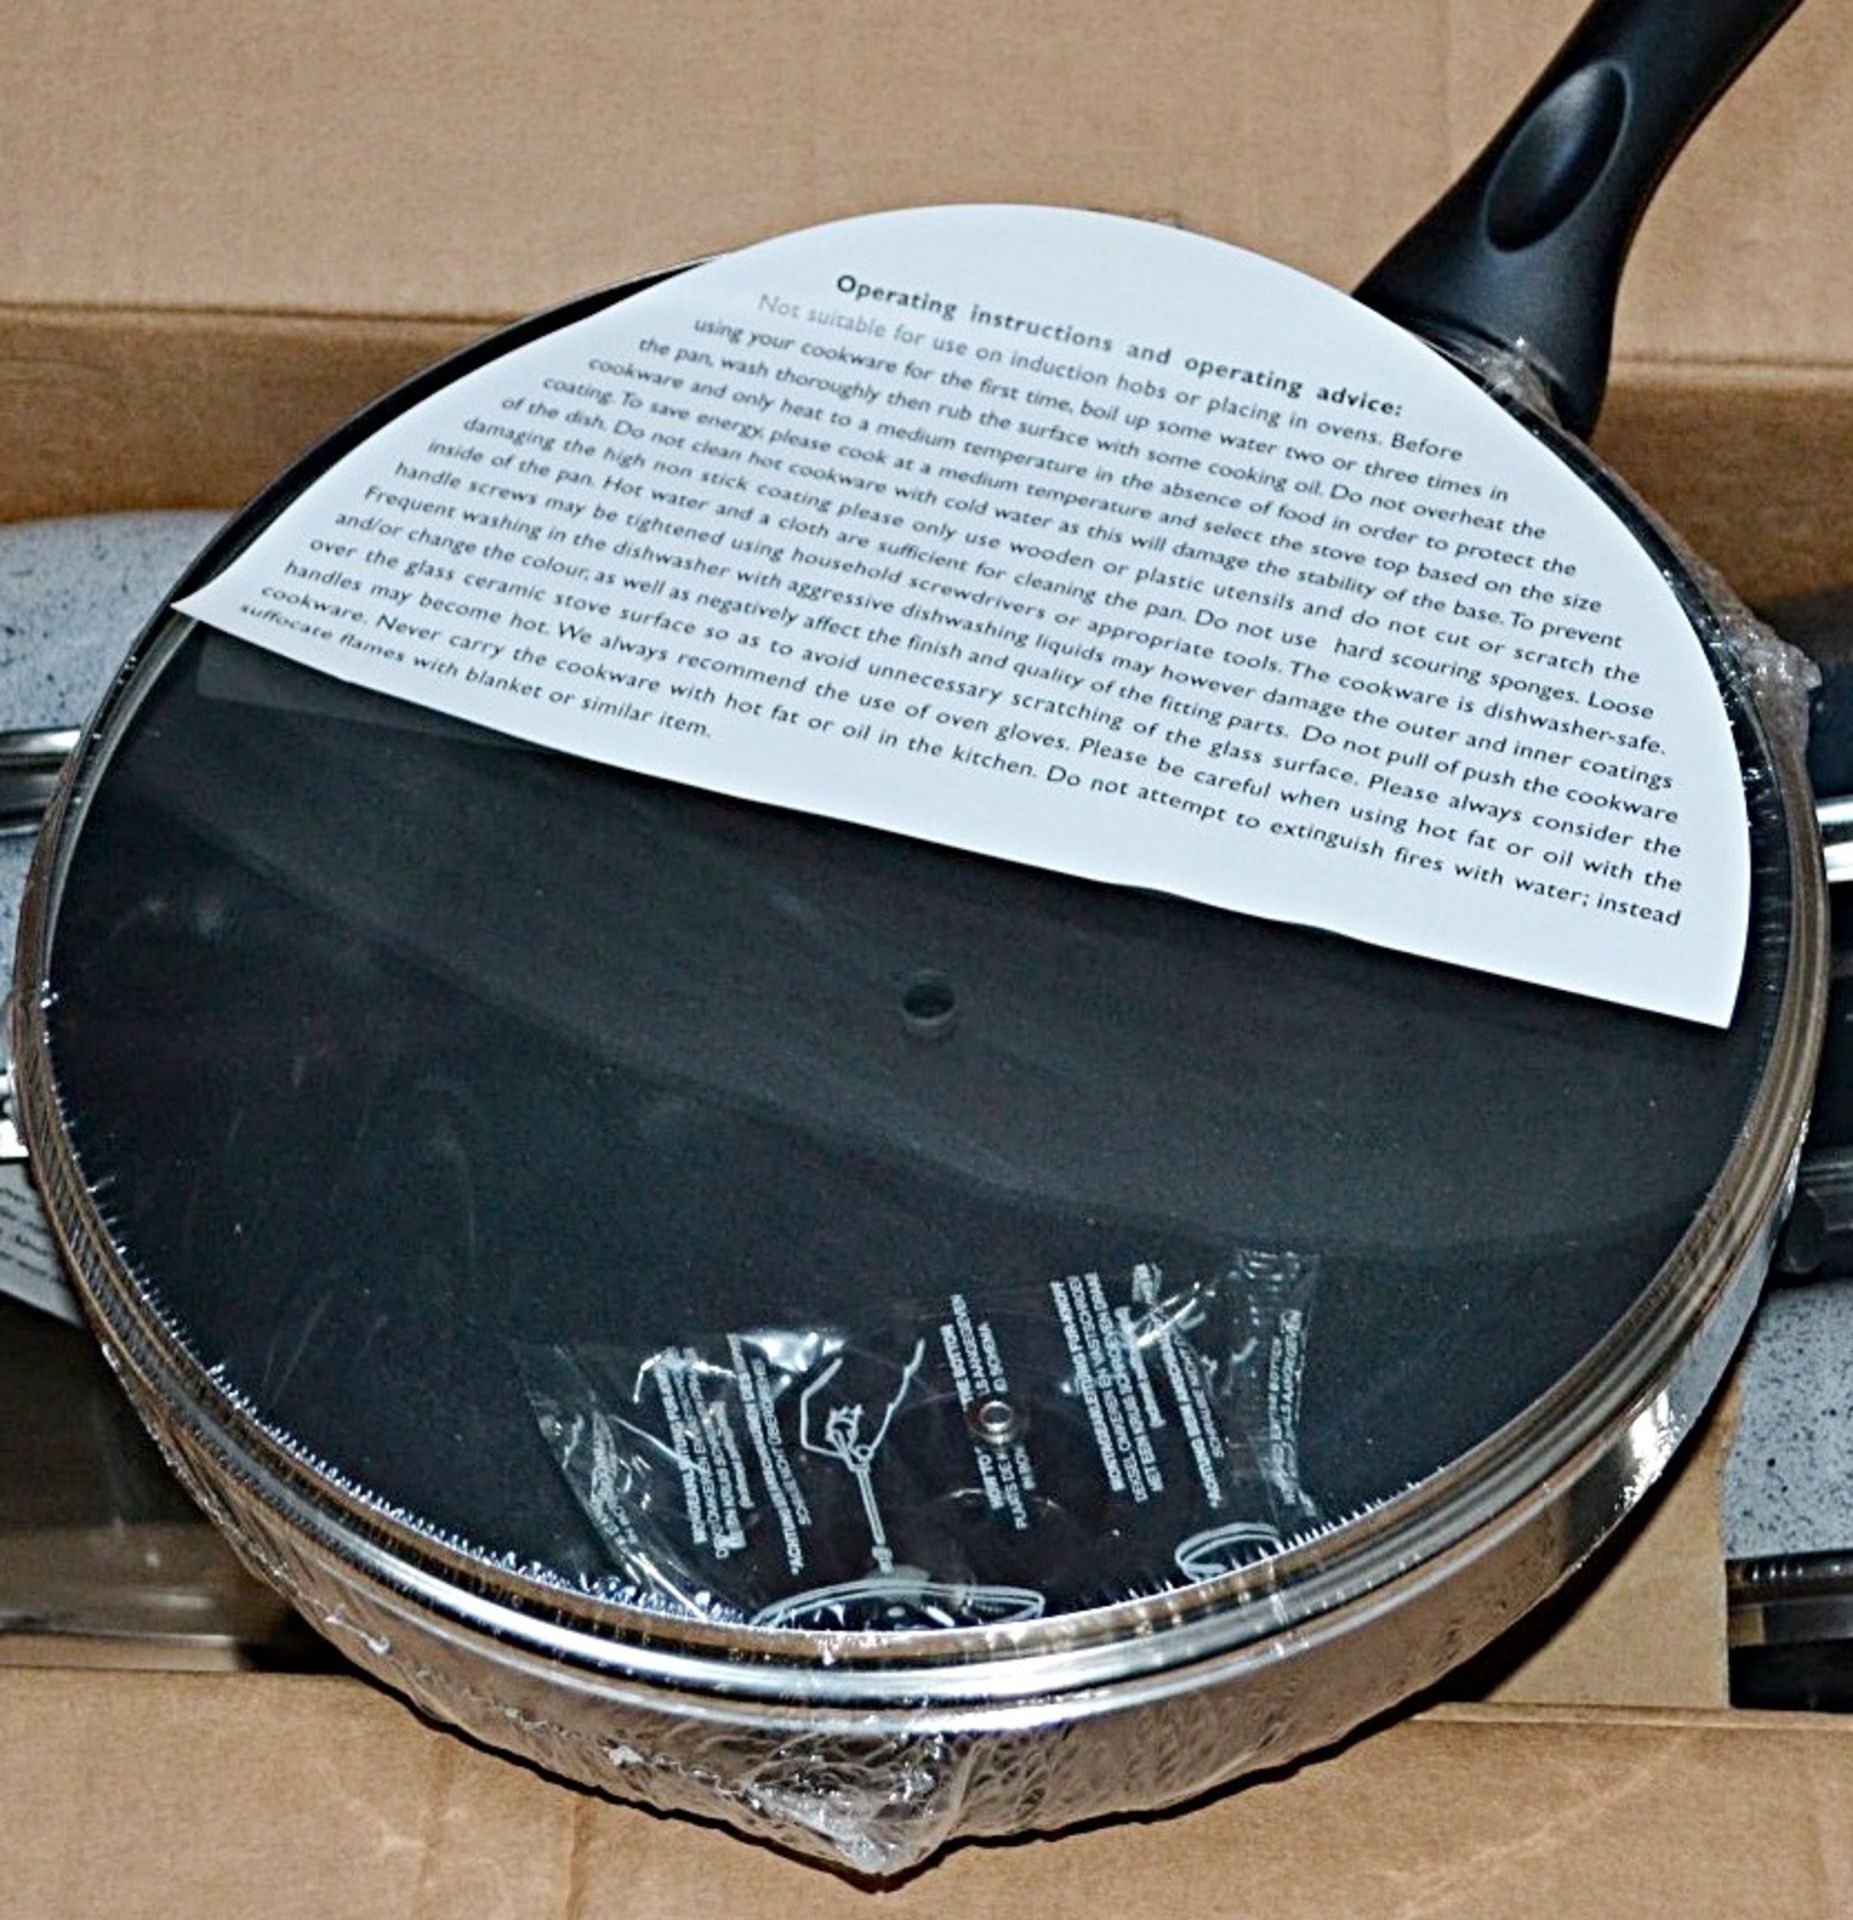 1 x 28cm Non-stick Frying Pans with Glass Lids - Colour: Black - Made In Italy - New & Sealed Stock, - Image 5 of 5